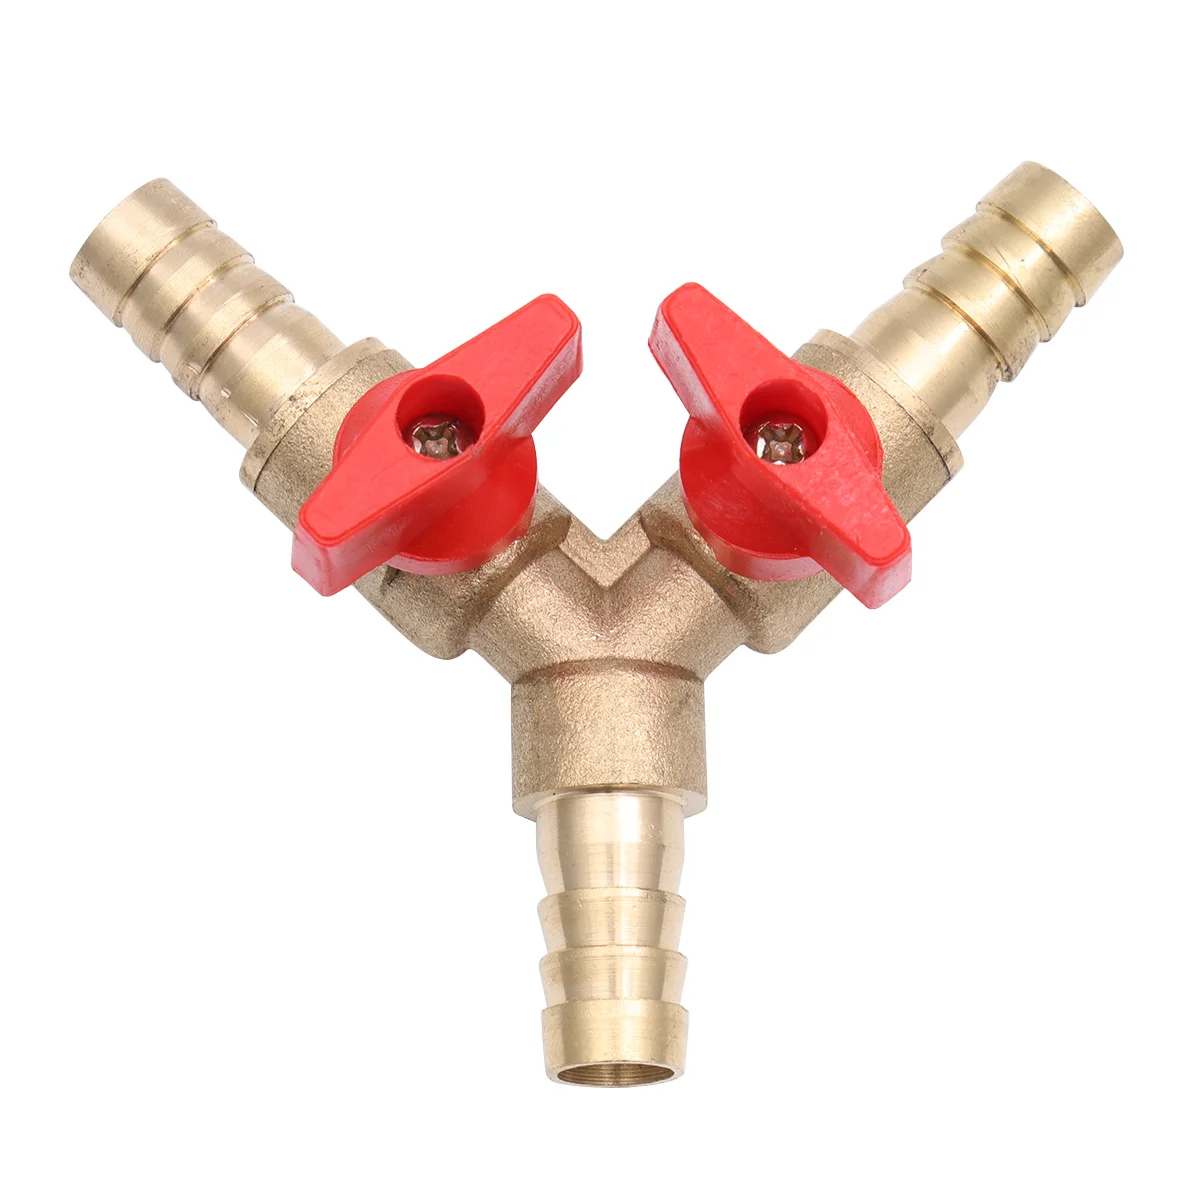 Y Shape Three-way Gas Pipe Distribution Switch Shut Off Ball Fitting Hose Barb Fuel Gas Clamp Tee (Copper 10mm Golden Red)